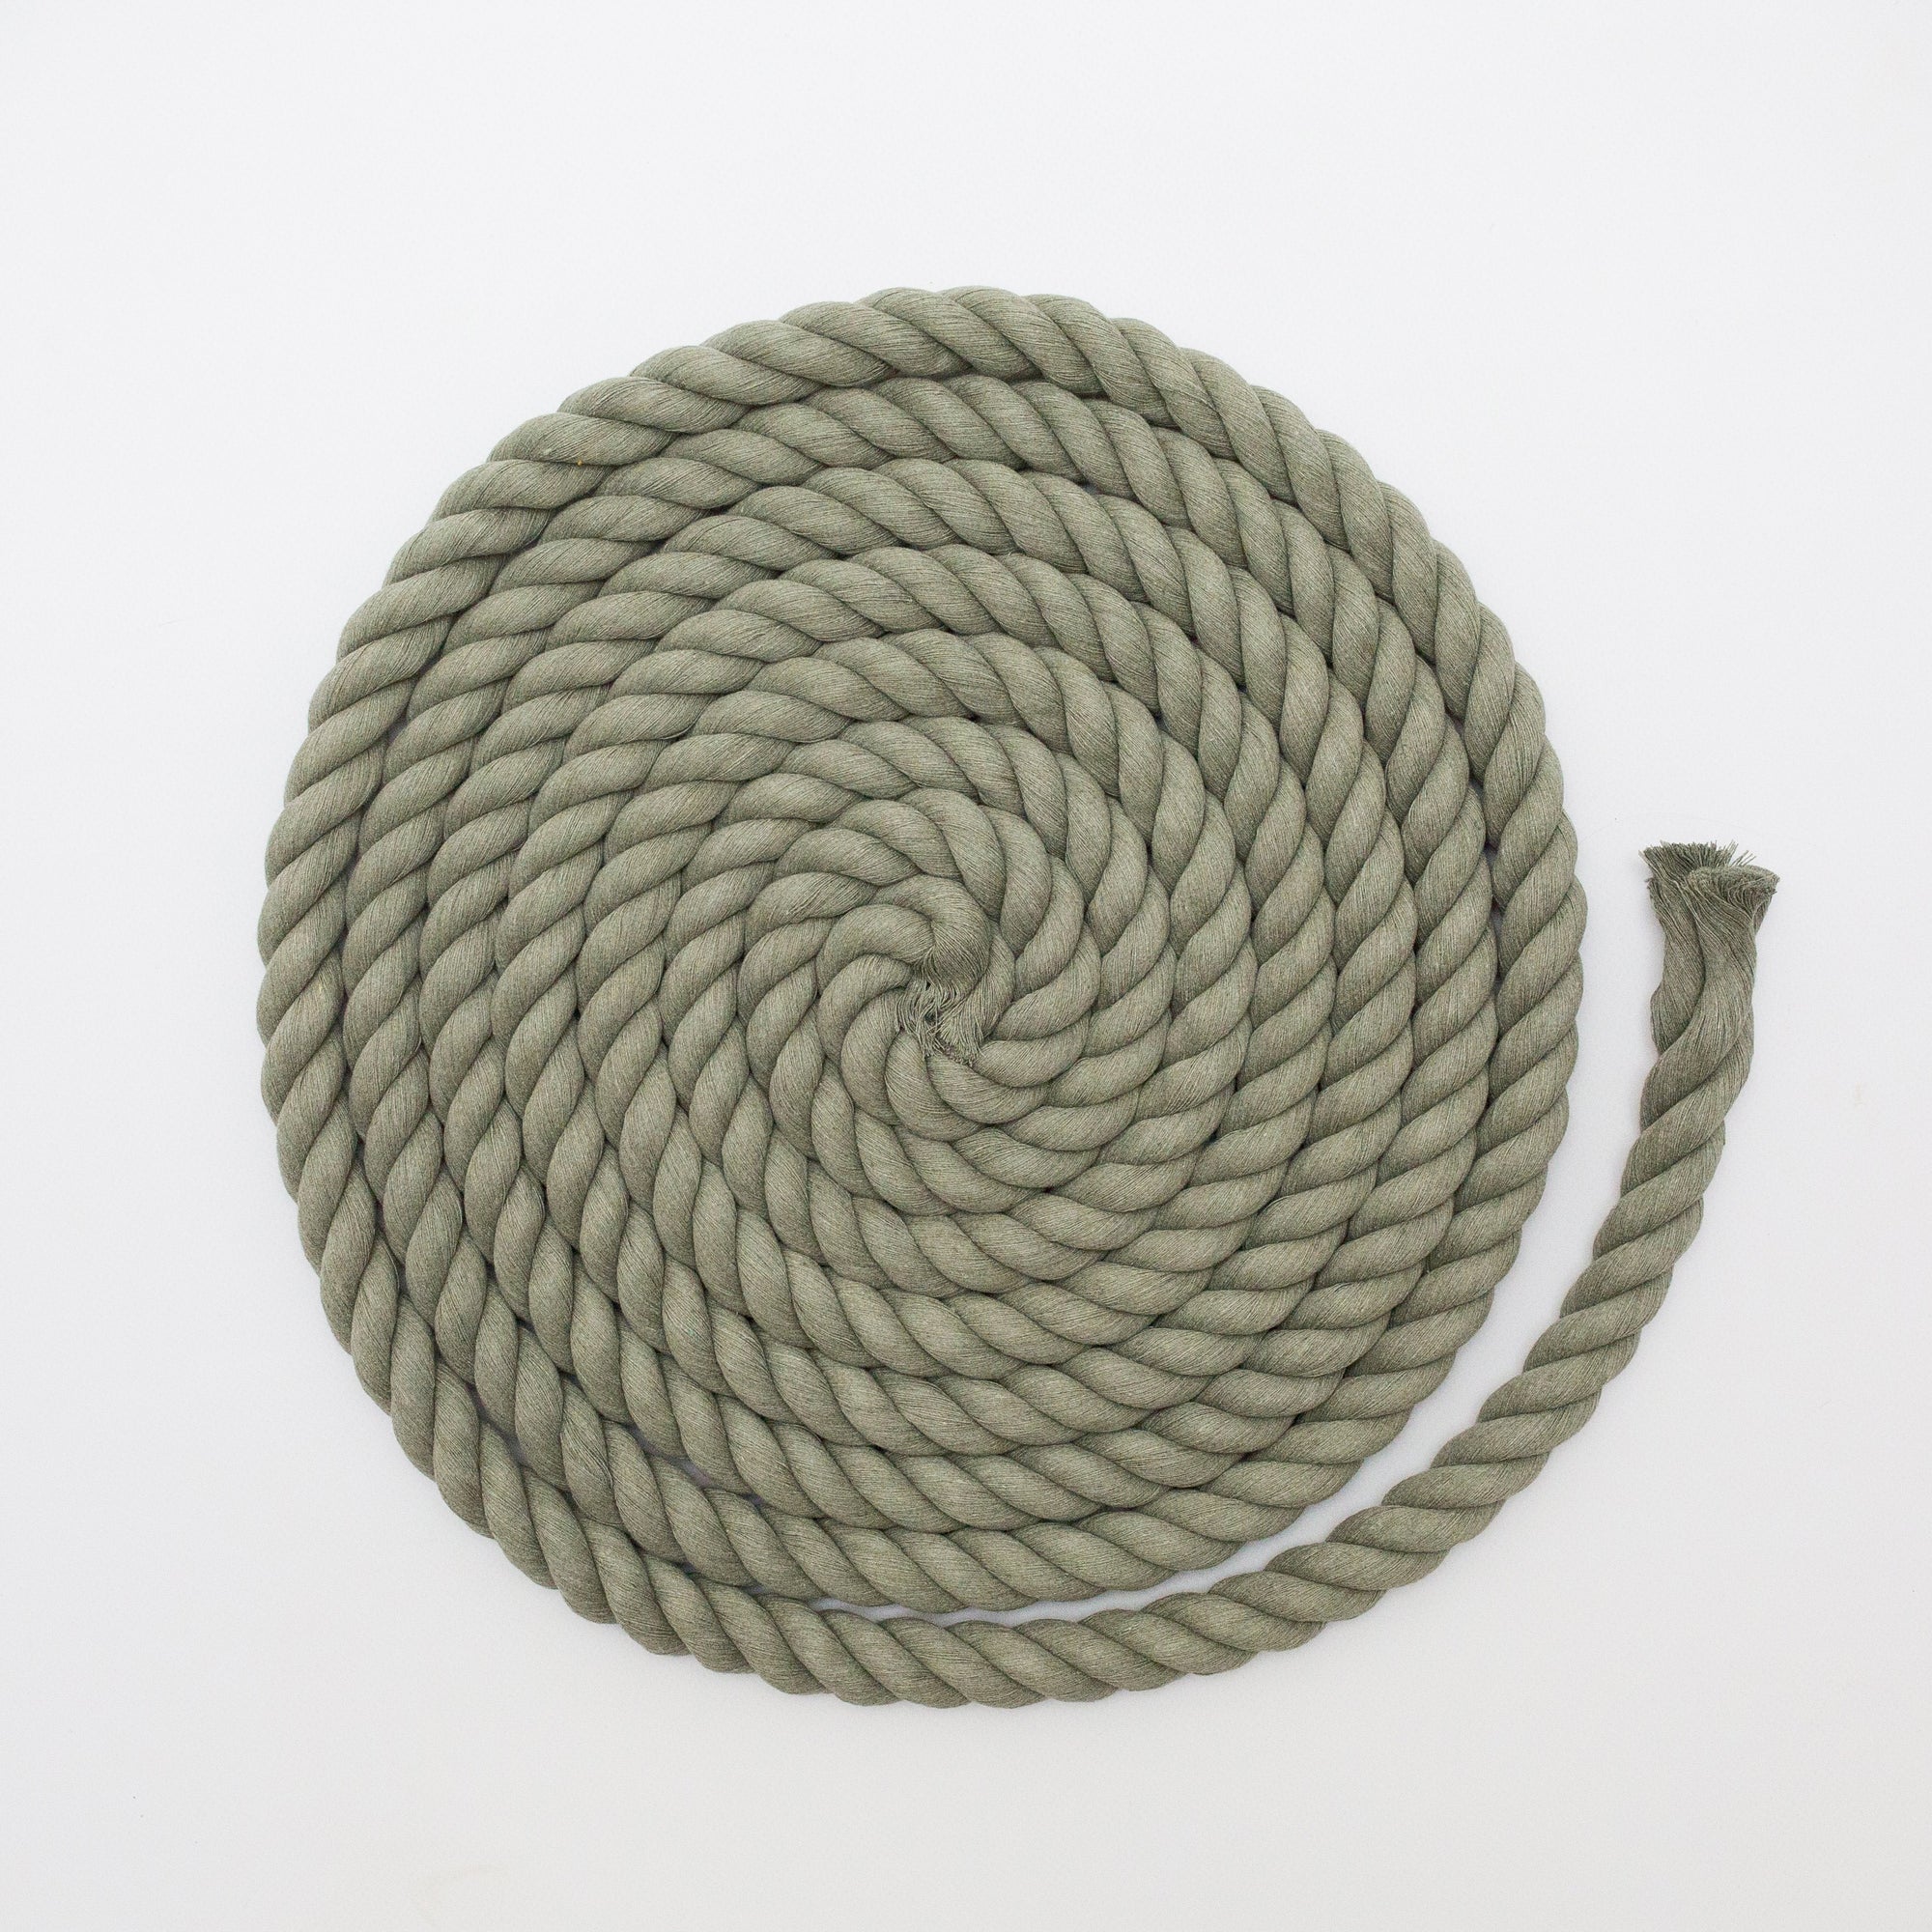 Mary Maker Studio 3Ply Twisted Rope Sage 1m 20mm Coloured Macrame Rope macrame cotton macrame rope macrame workshop macrame patterns macrame